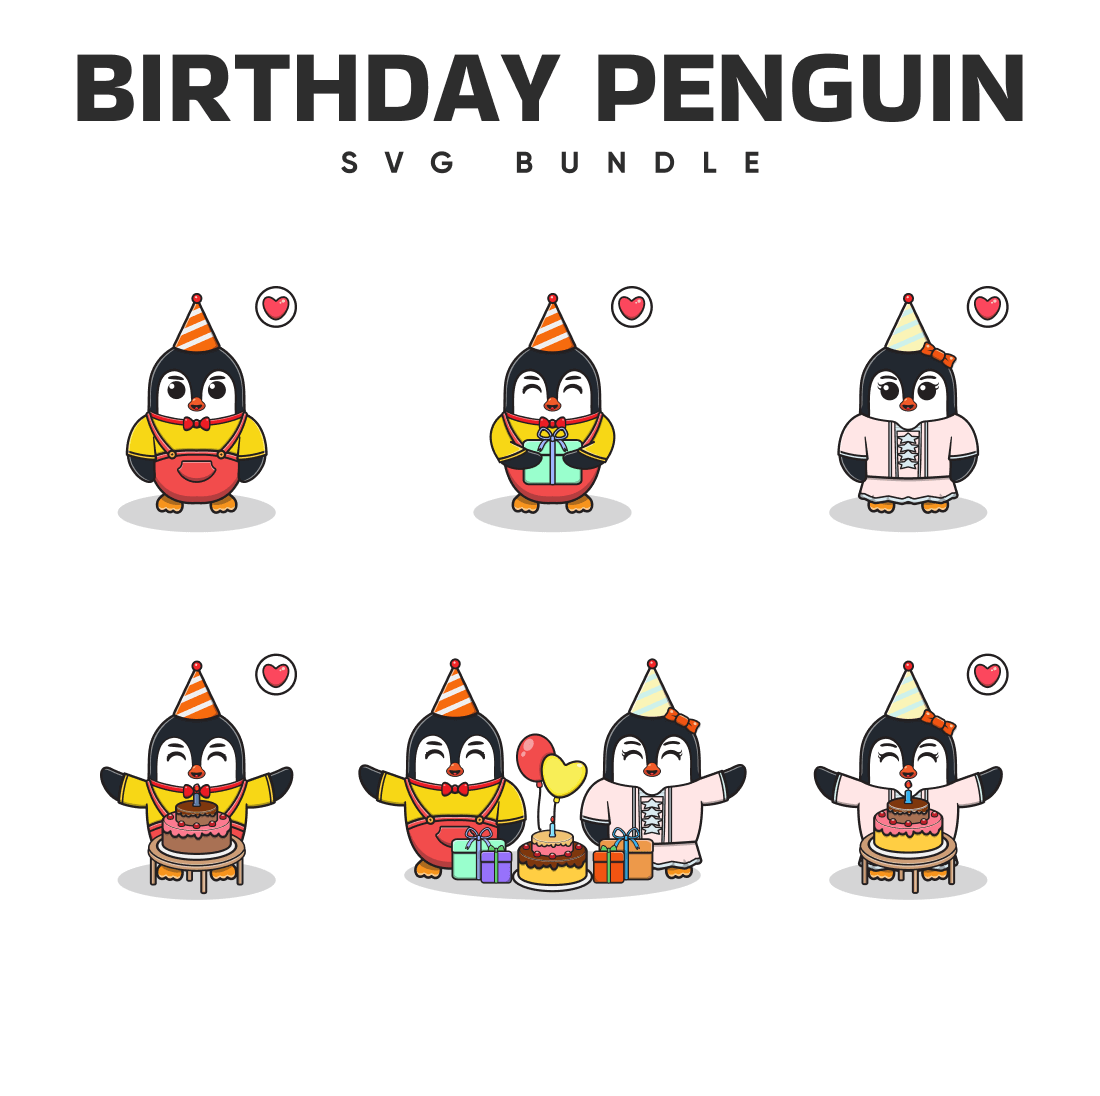 Bunch of cartoon penguins with birthday hats.